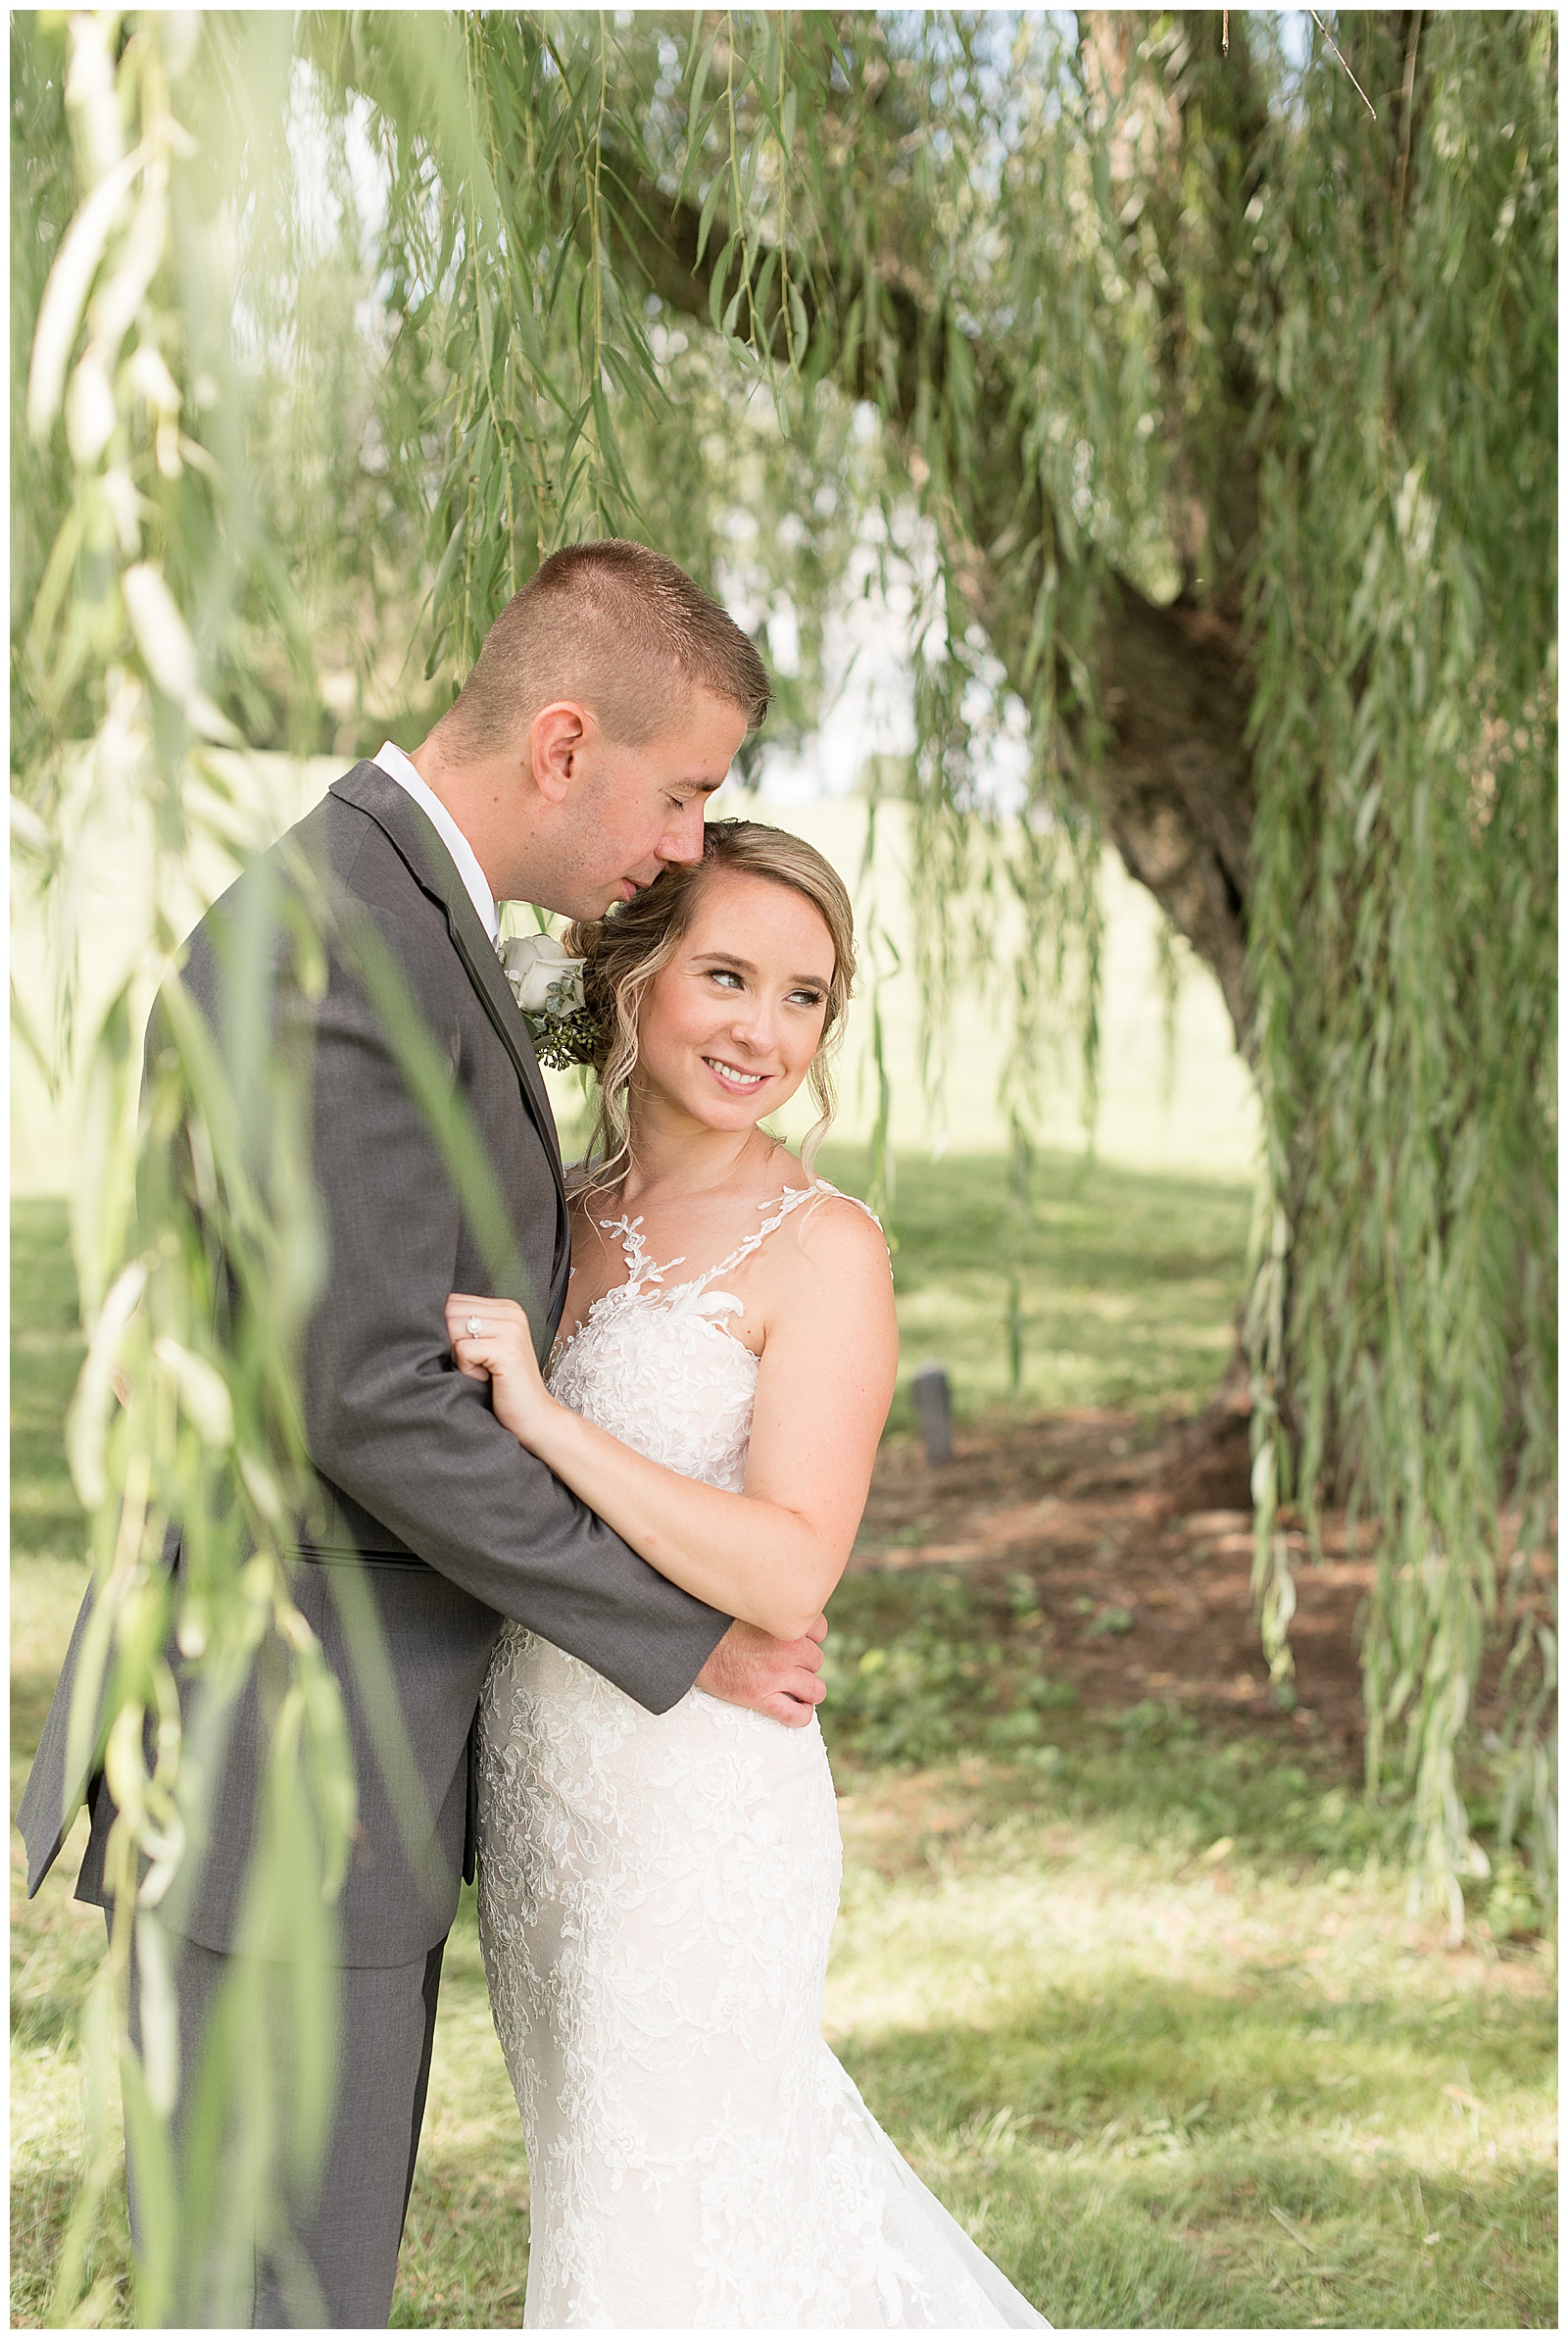 close up photo of the groom hugging the bride while he faces the right side of the photo and rests his face on the bride's side of her head and she faces him while resting her left arm on his and smiling and looking over her left shoulder while standing in front of a willow tree in a grassy field at Lakefield Weddings in Manheim, PA